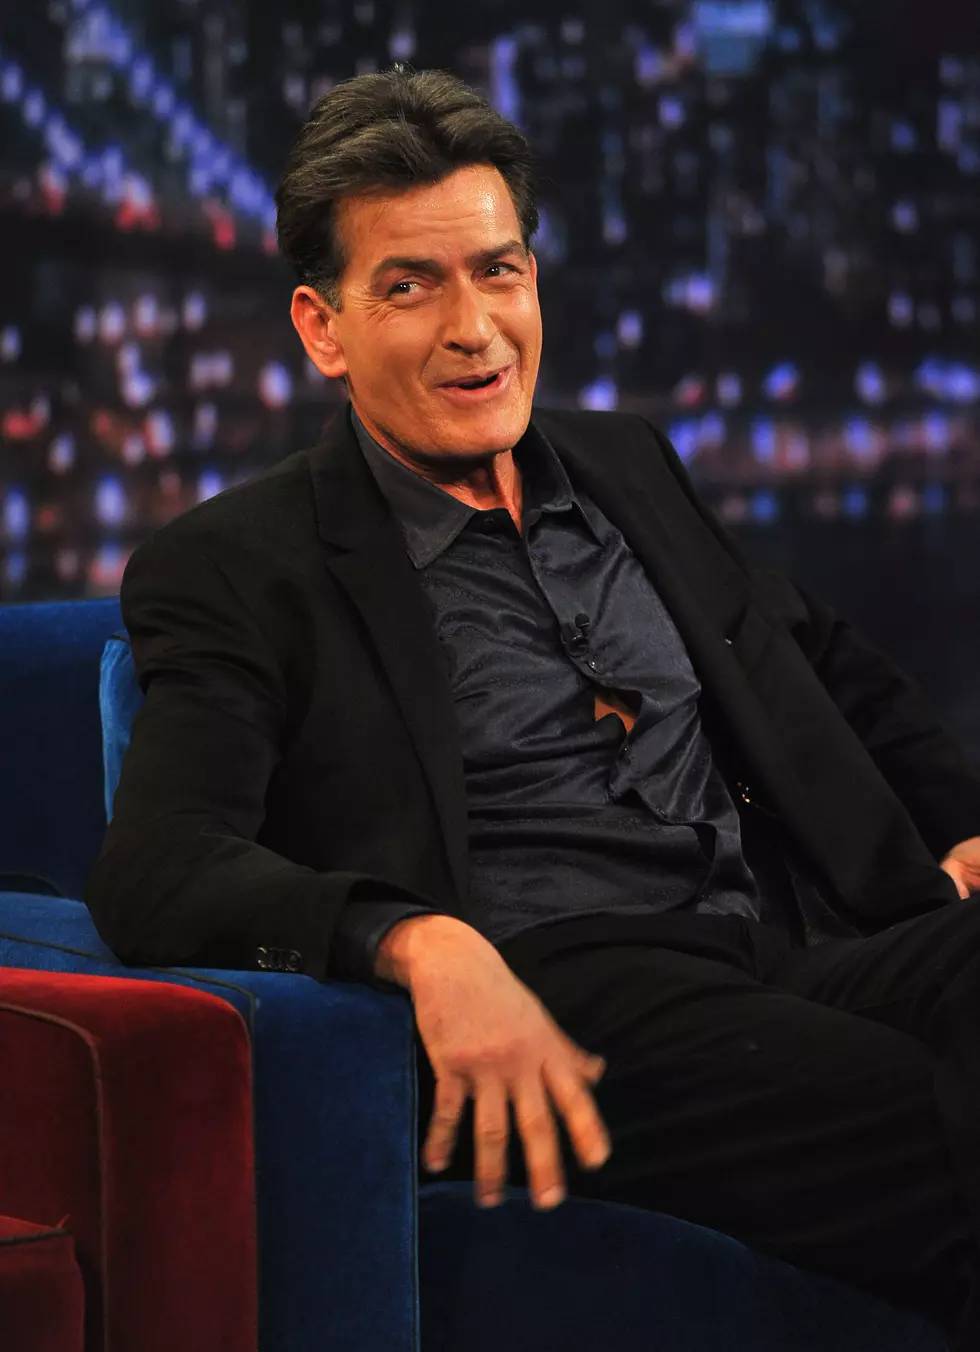 Charlie Sheen Tries To Help With Video